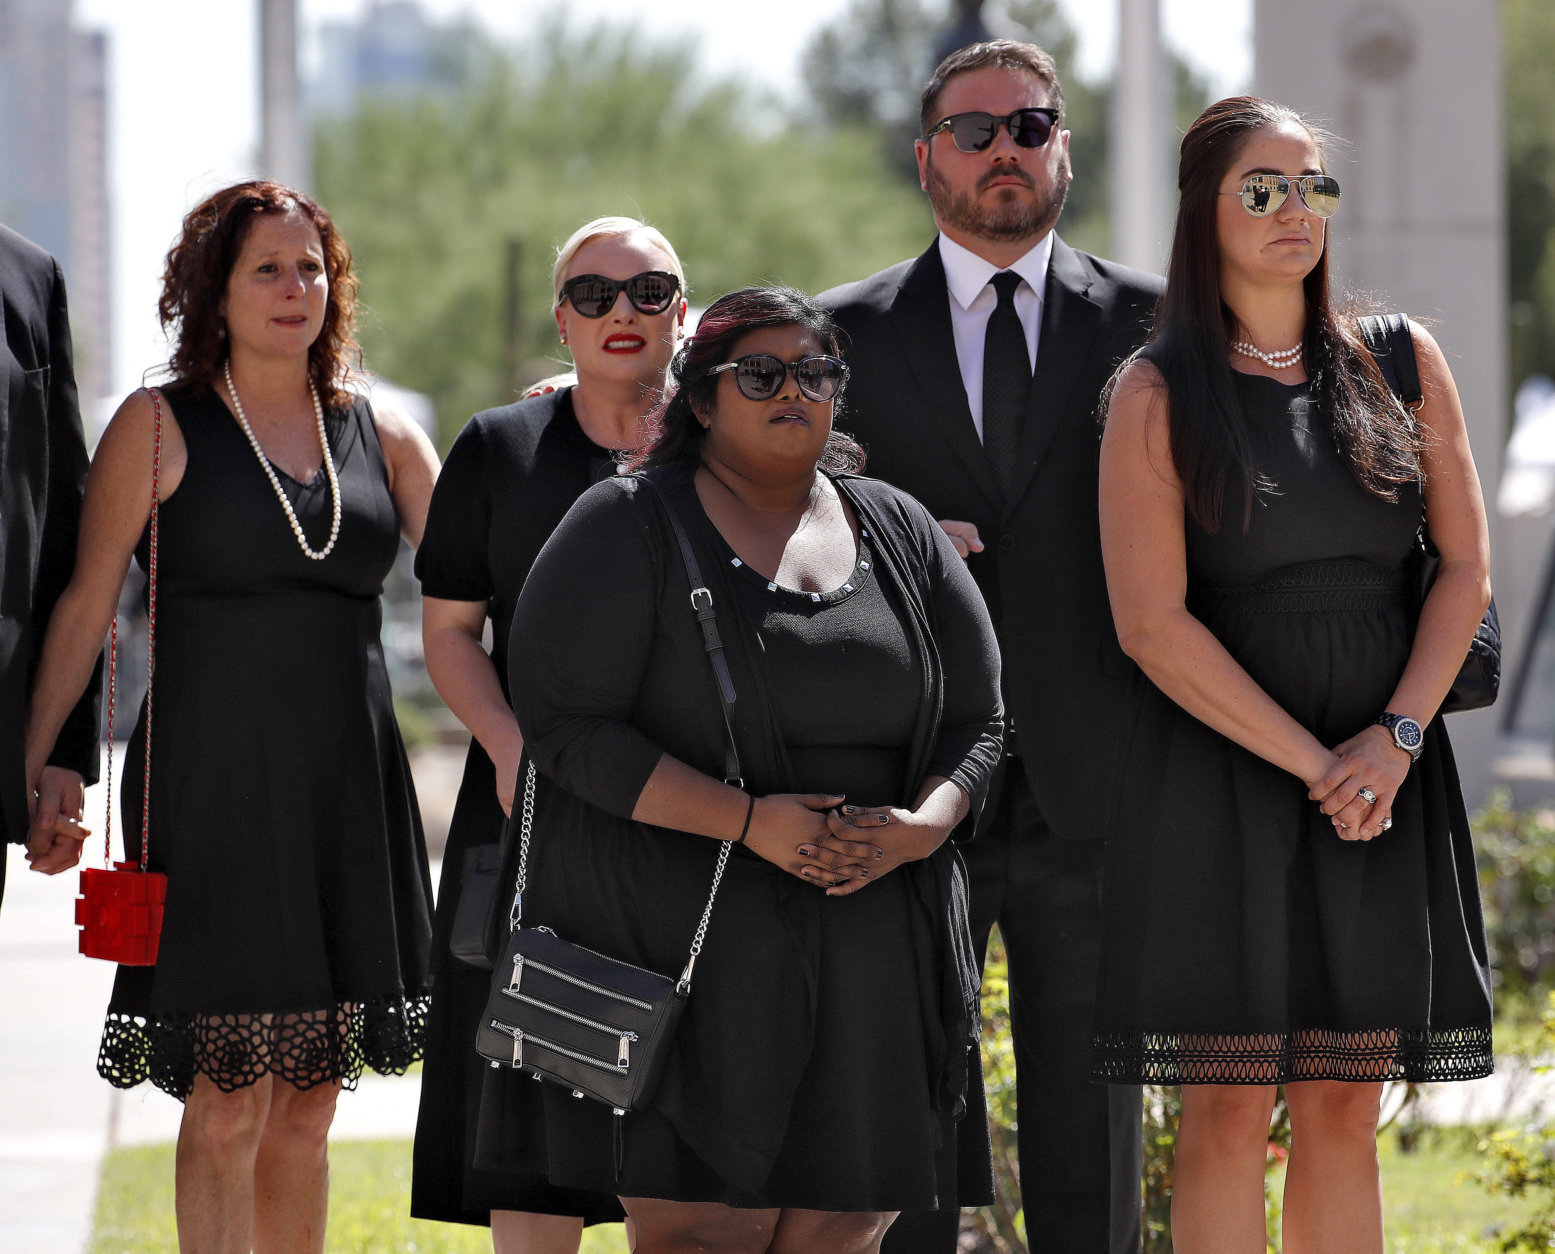 Children of Sen. John McCain, R-Ariz., from back left Sidney McCain, Meghan McCain and her husband Ben Domenech, Bridget McCain, front center and daughter-in-law Holly McCain, follow behind the casket into the Capitol rotunda for a memorial service, Wednesday, Aug. 29, 2018, at the Capitol in Phoenix. (AP Photo/Matt York)